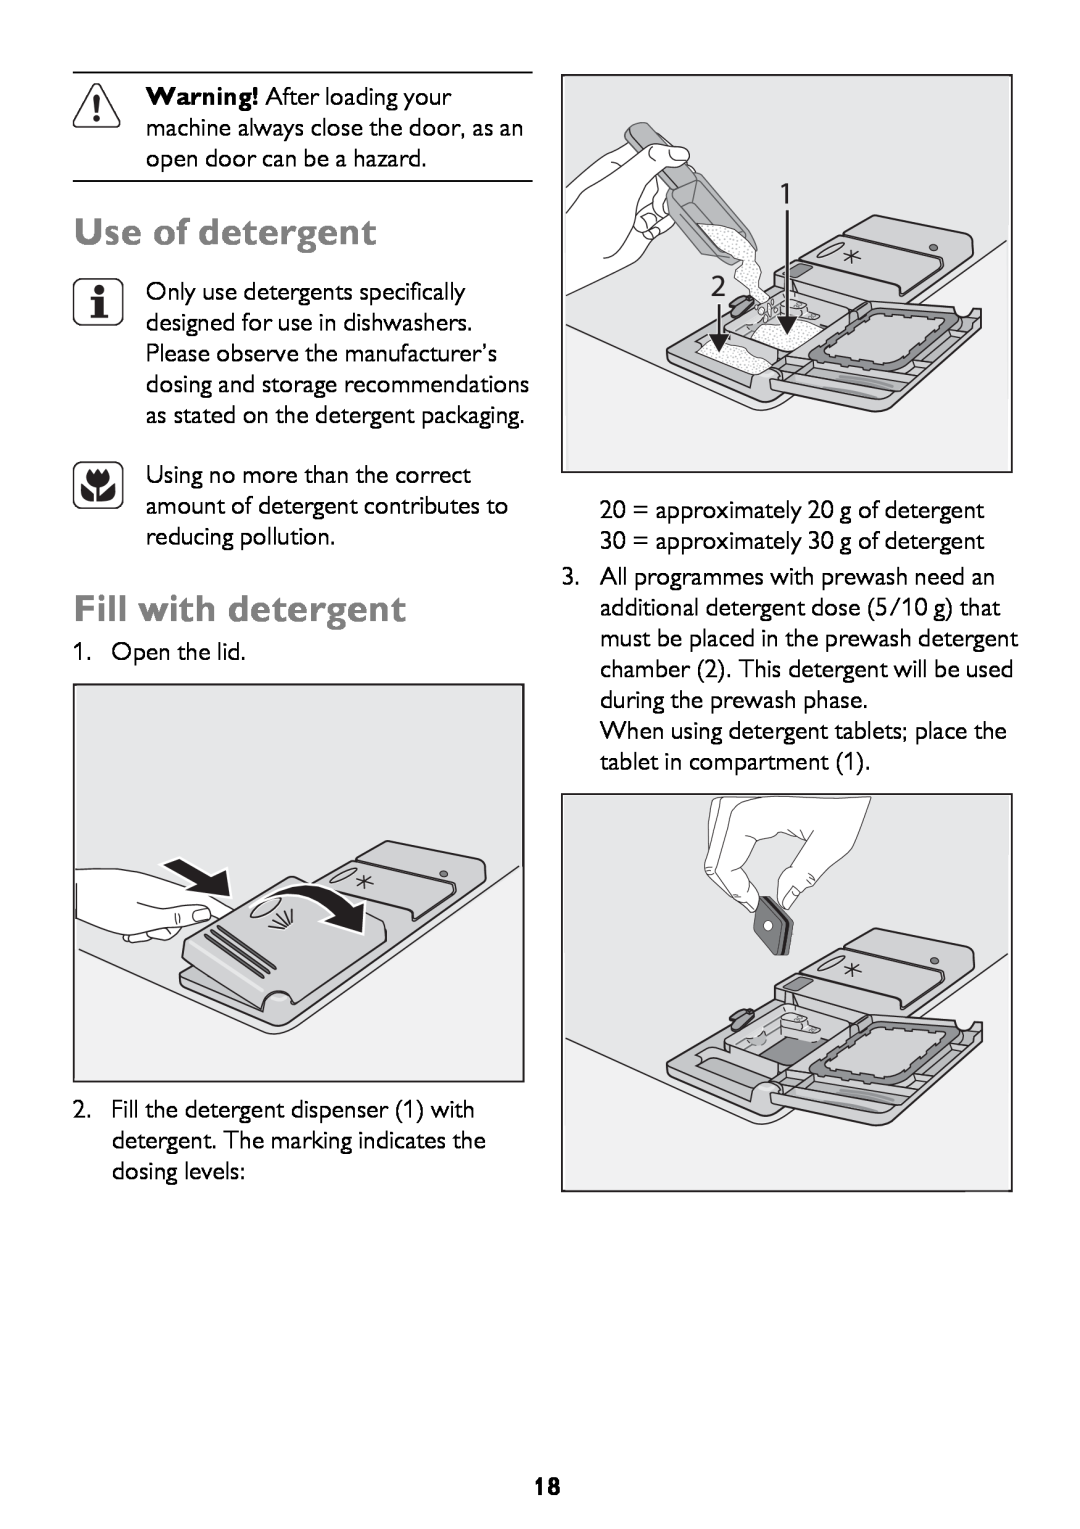 John Lewis JLDWS1208 instruction manual Use of detergent, Fill with detergent 